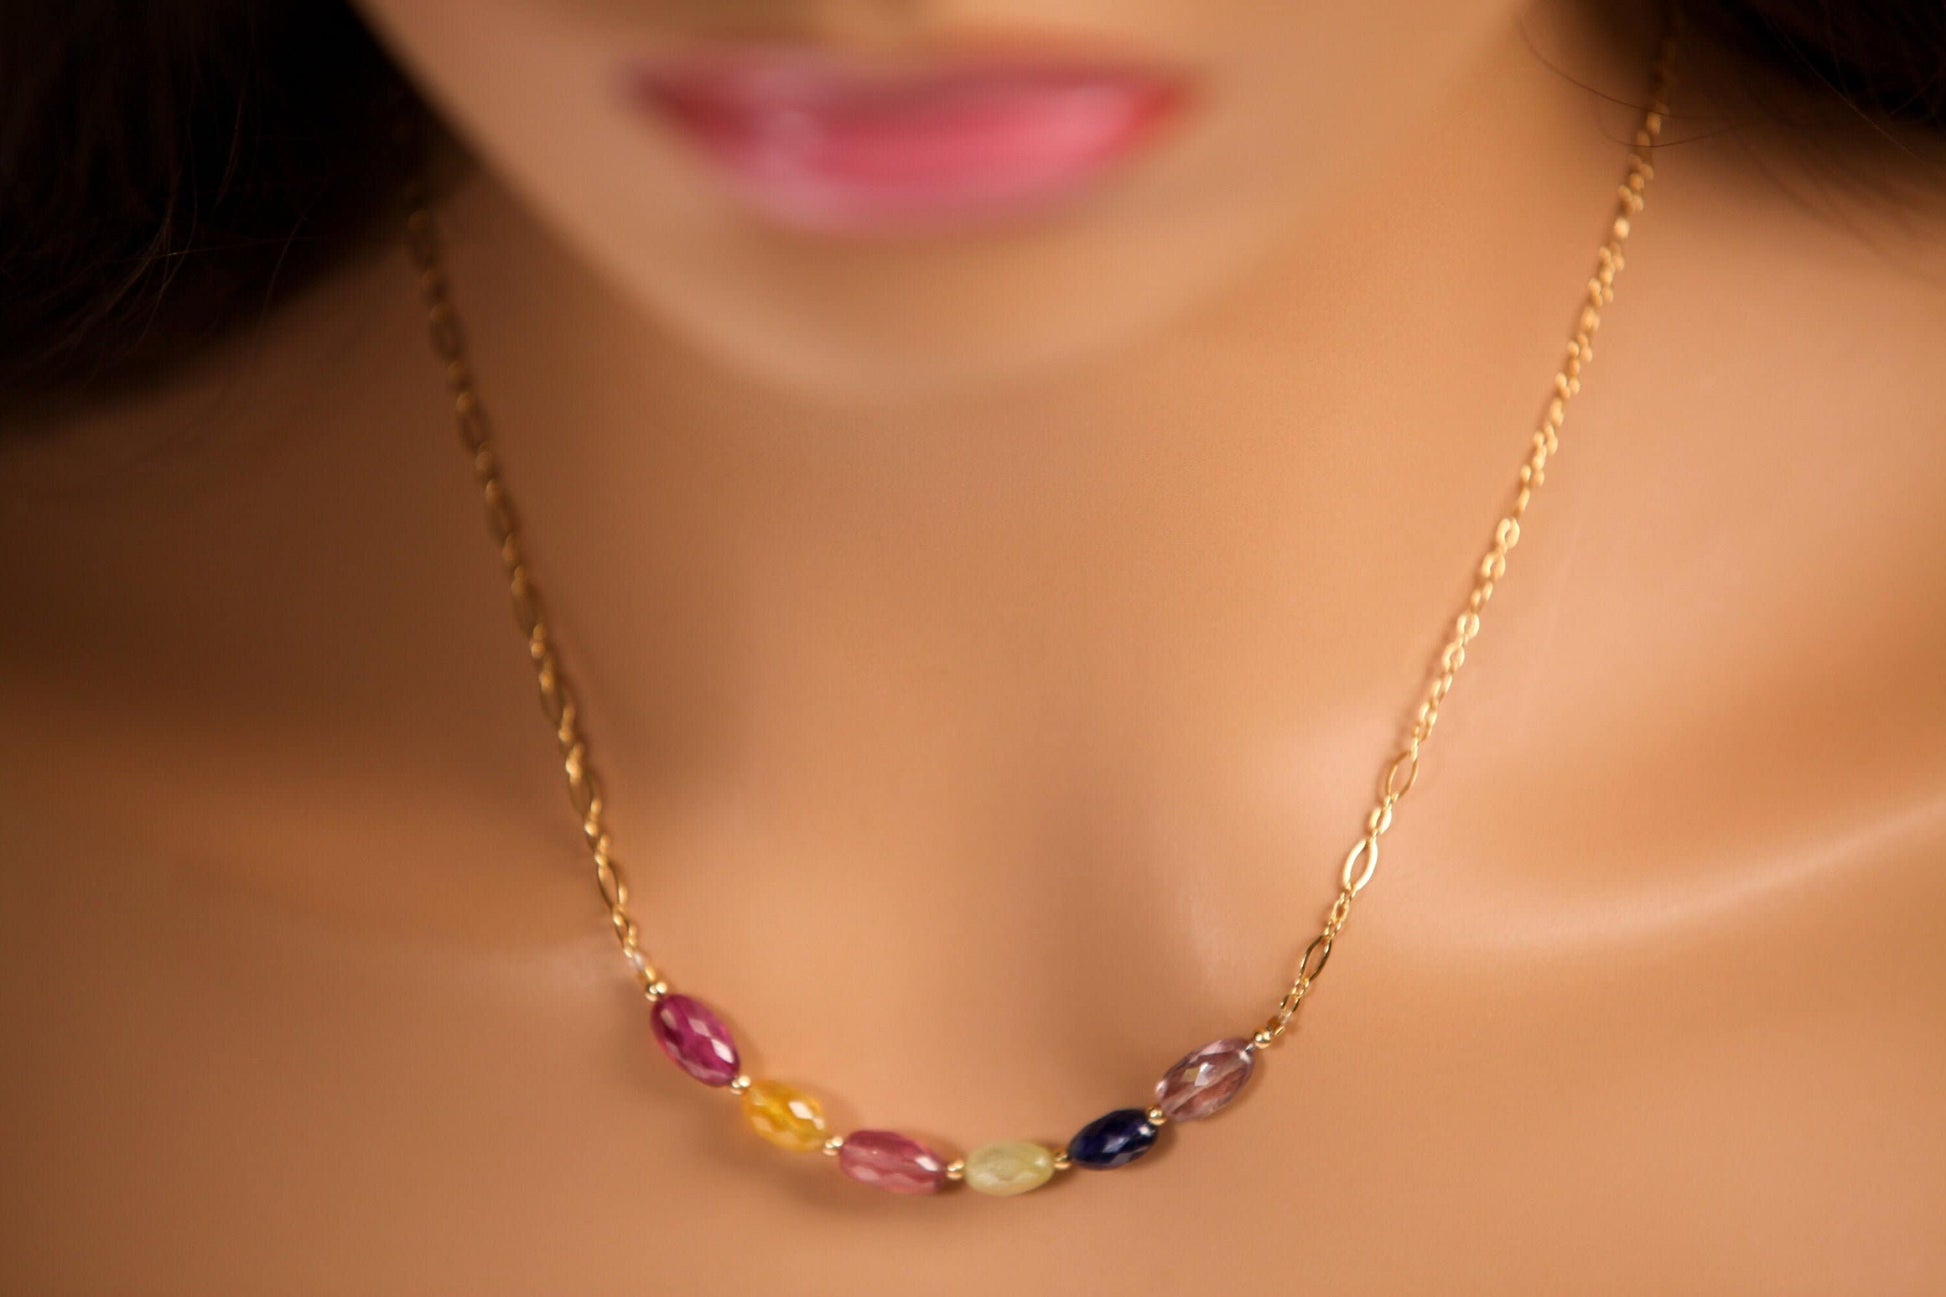 Natural Multi Sapphire Faceted Oval 5x8-9mm Gemstone Bar Necklace with 14K Gold Filled Spacers, Clasps and Chain, Elegant Gift for her